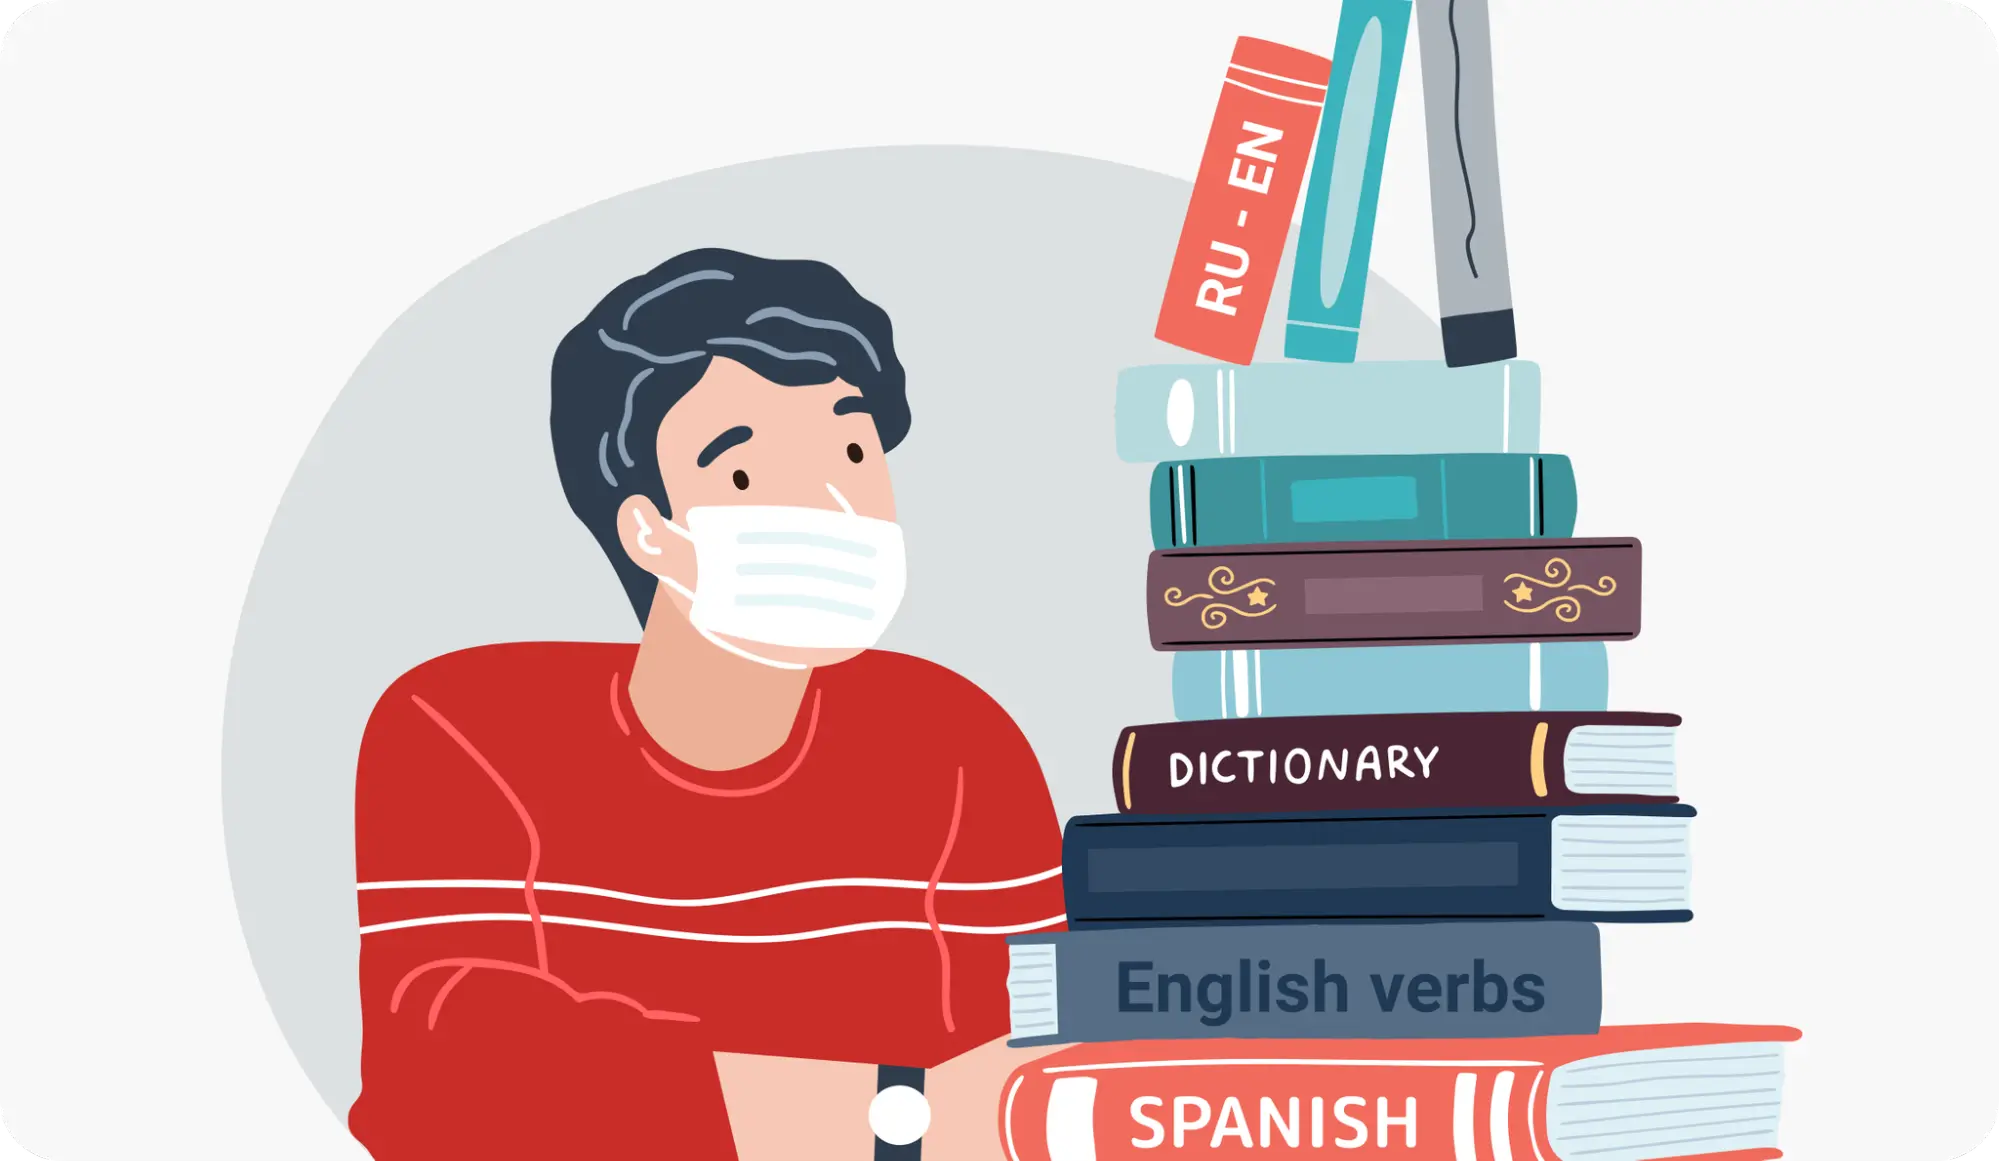 How To Break Down the Barriers of Learning a New Language